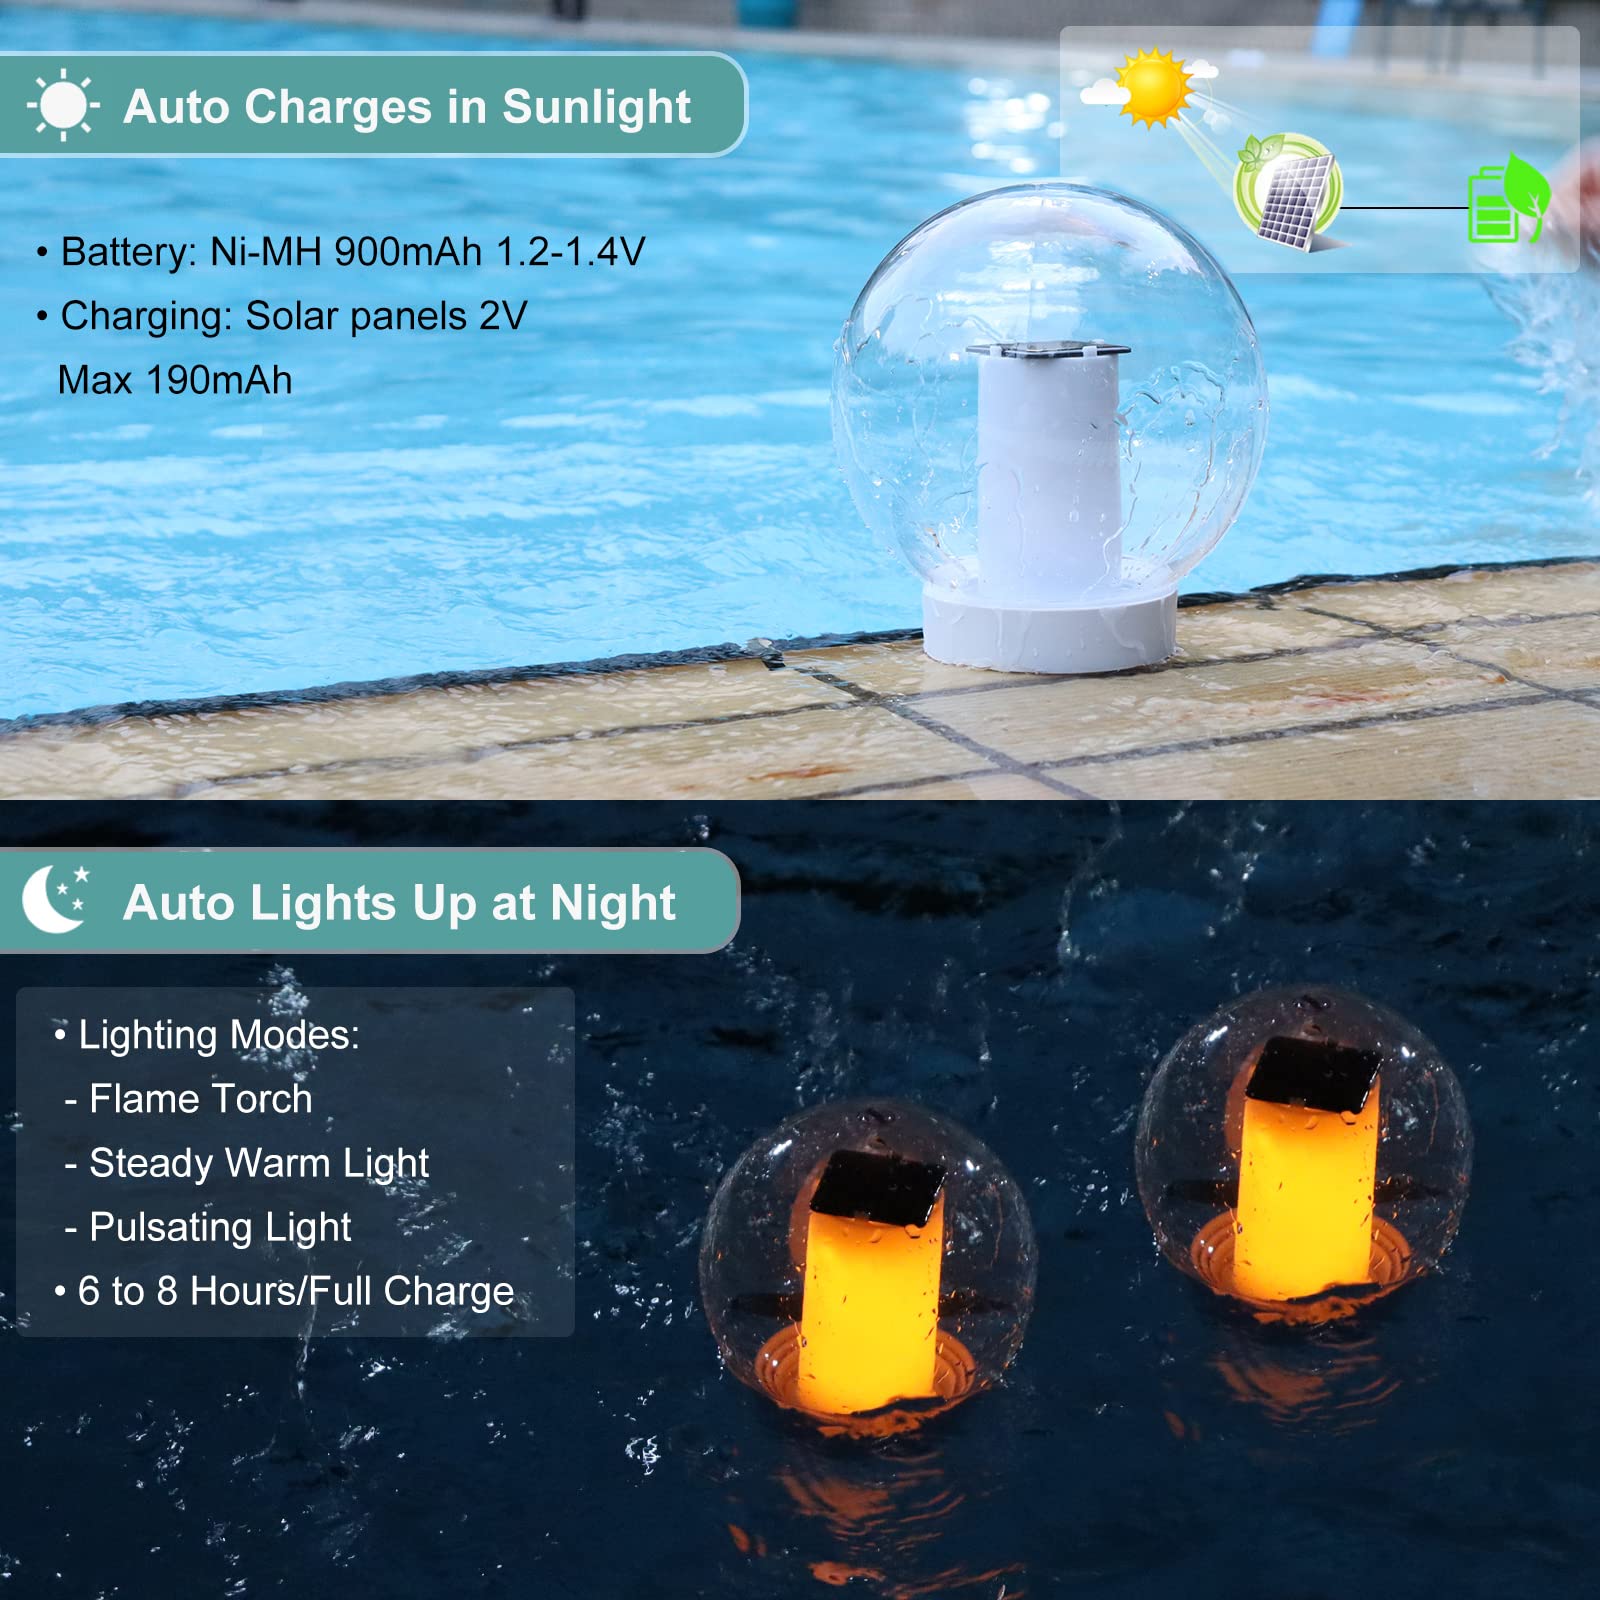 VISOFO Solar Floating Pool Lights for Swimming Pool | Outdoor Waterproof Decorations Solar Powered Flame Led Lamp Inground Pond Flickering Decor Party Event Night Above Ground IP68 (1 pcs)